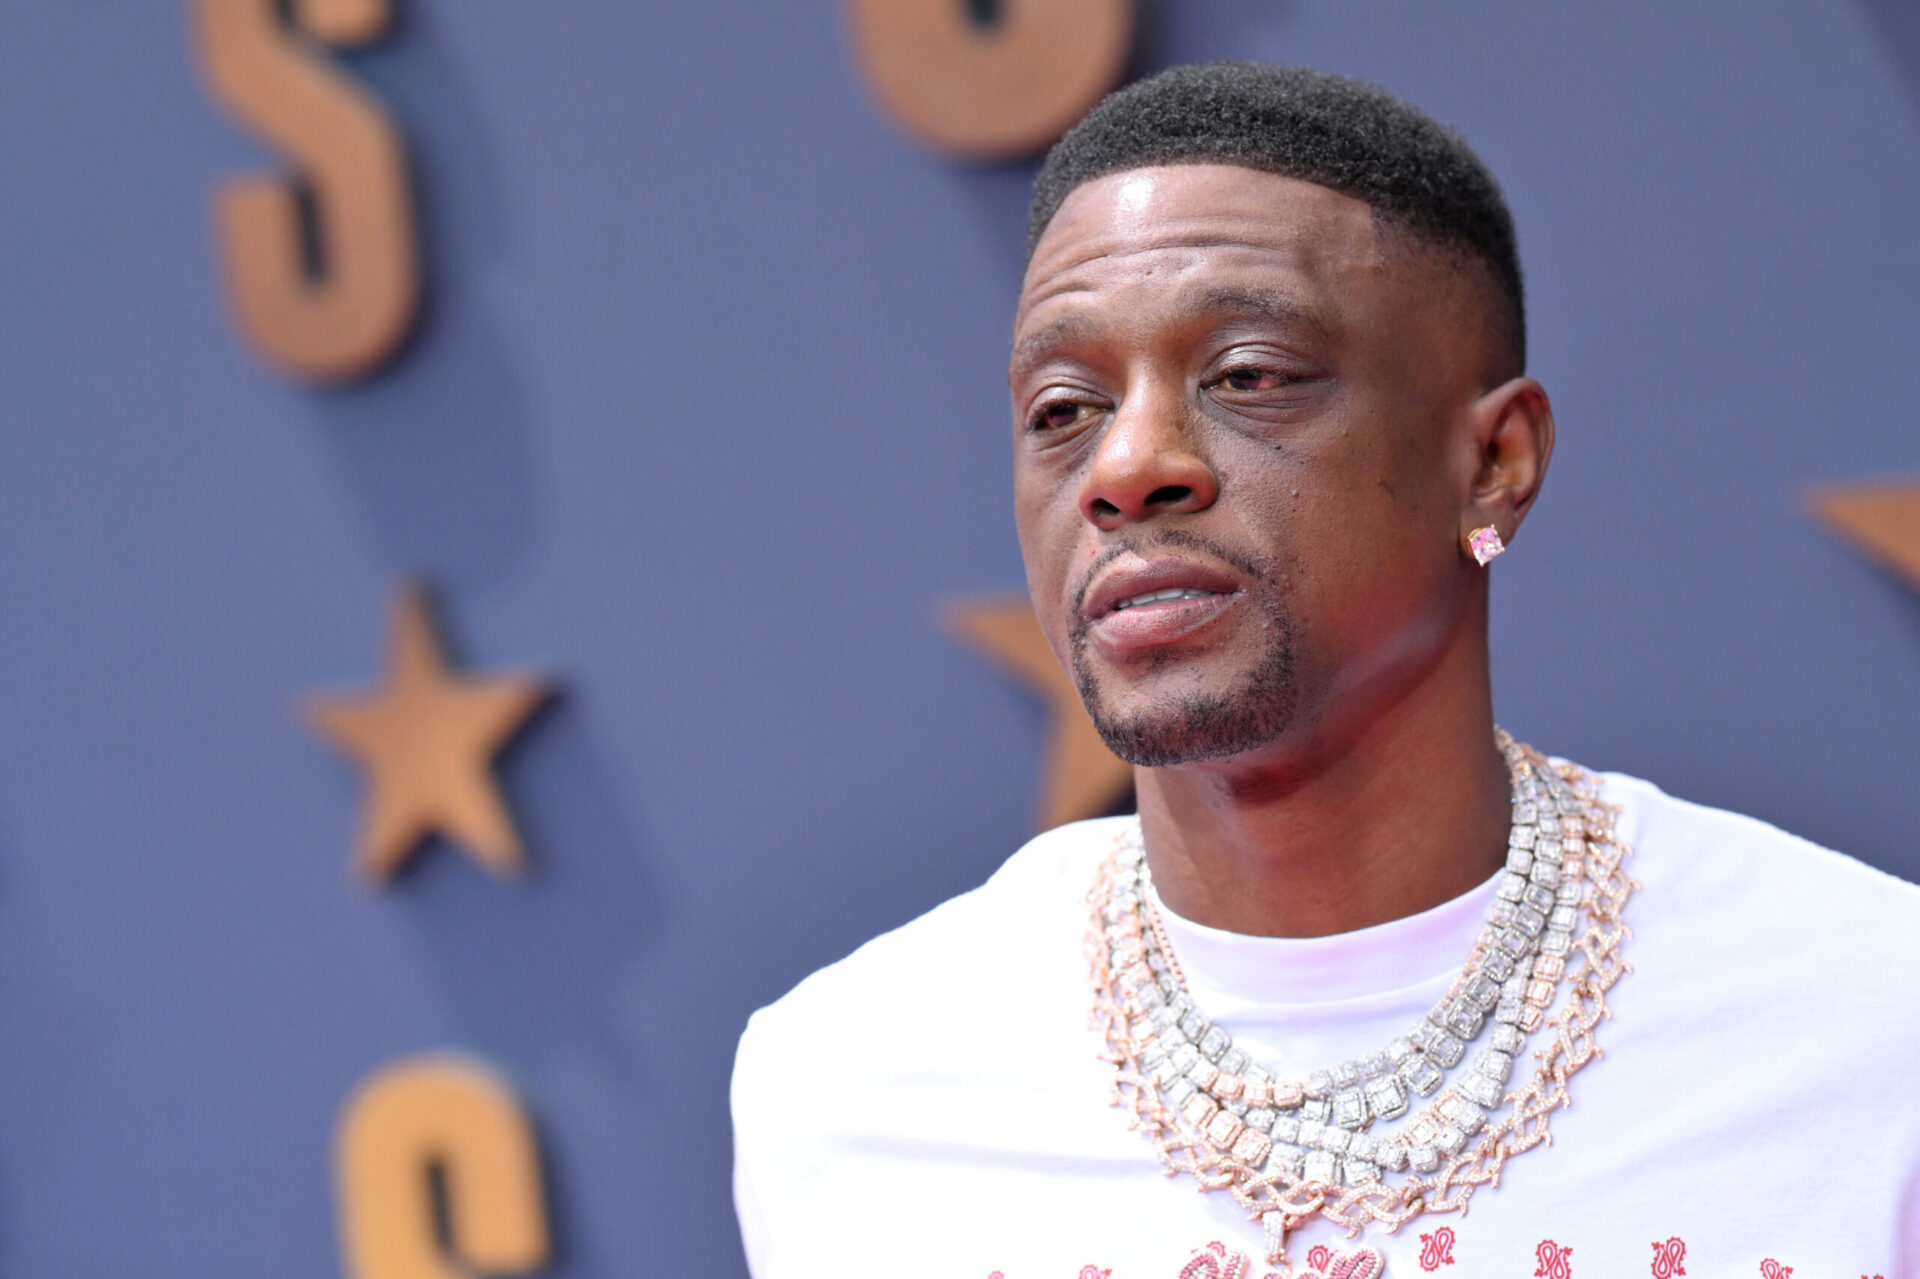 Boosie Badazz Says He 'Got My Chain Back' After Offering $10K